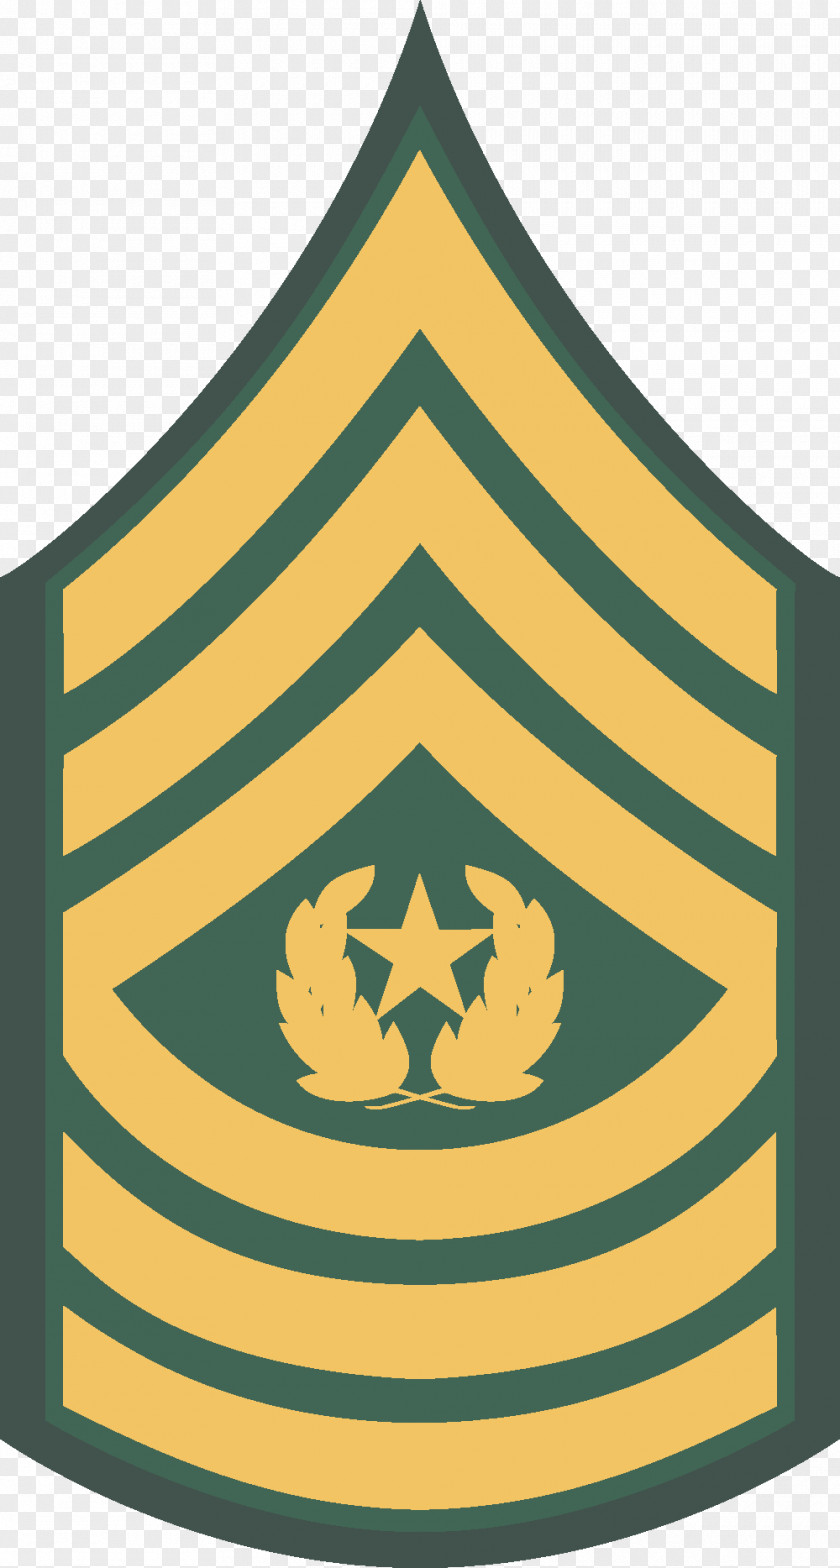 Military Sergeant Major Of The Army Rank Non-commissioned Officer PNG